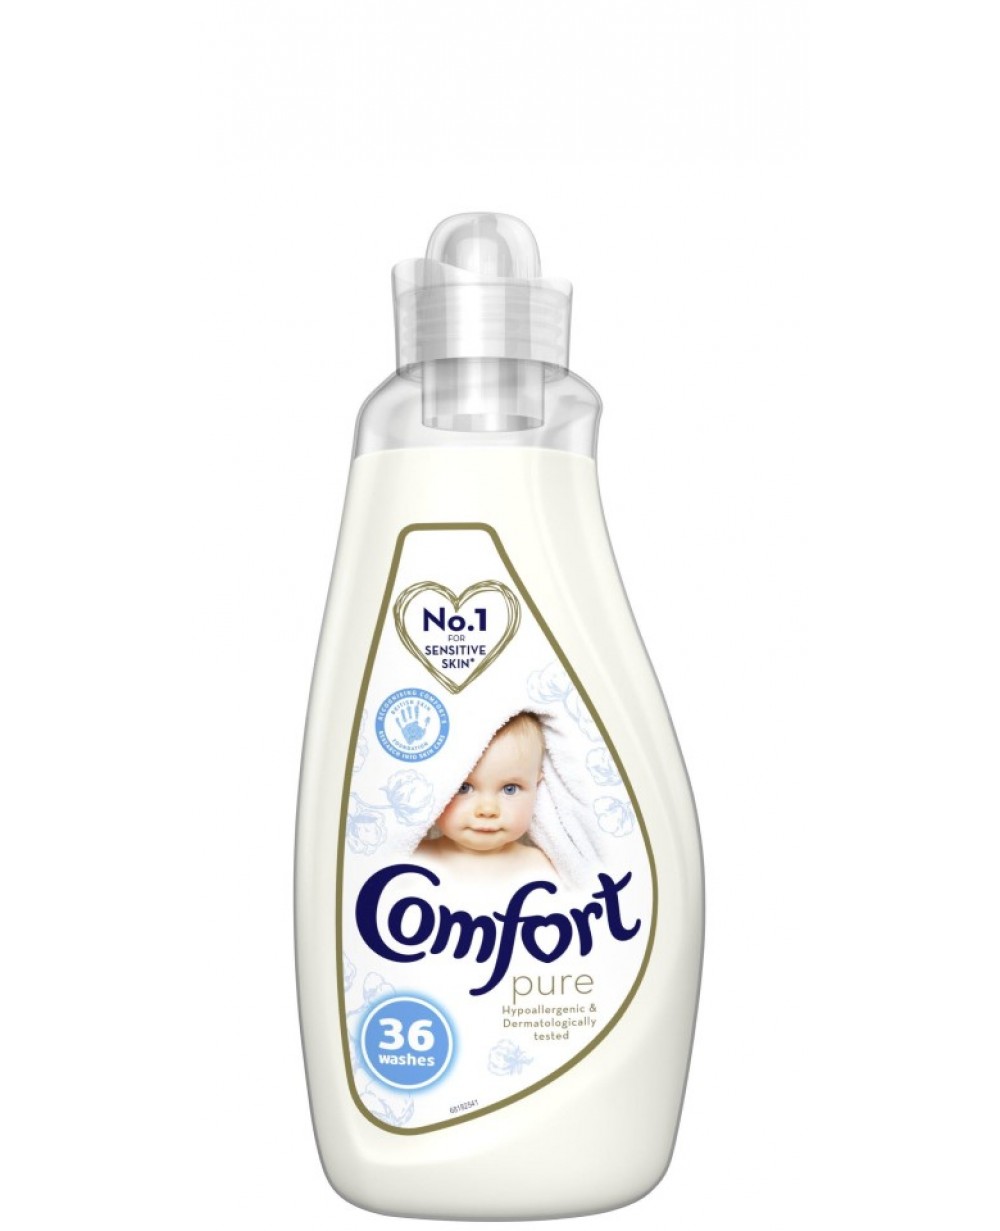 Comfort Concentrate Fabric Conditioner Pure 1.5L x 6